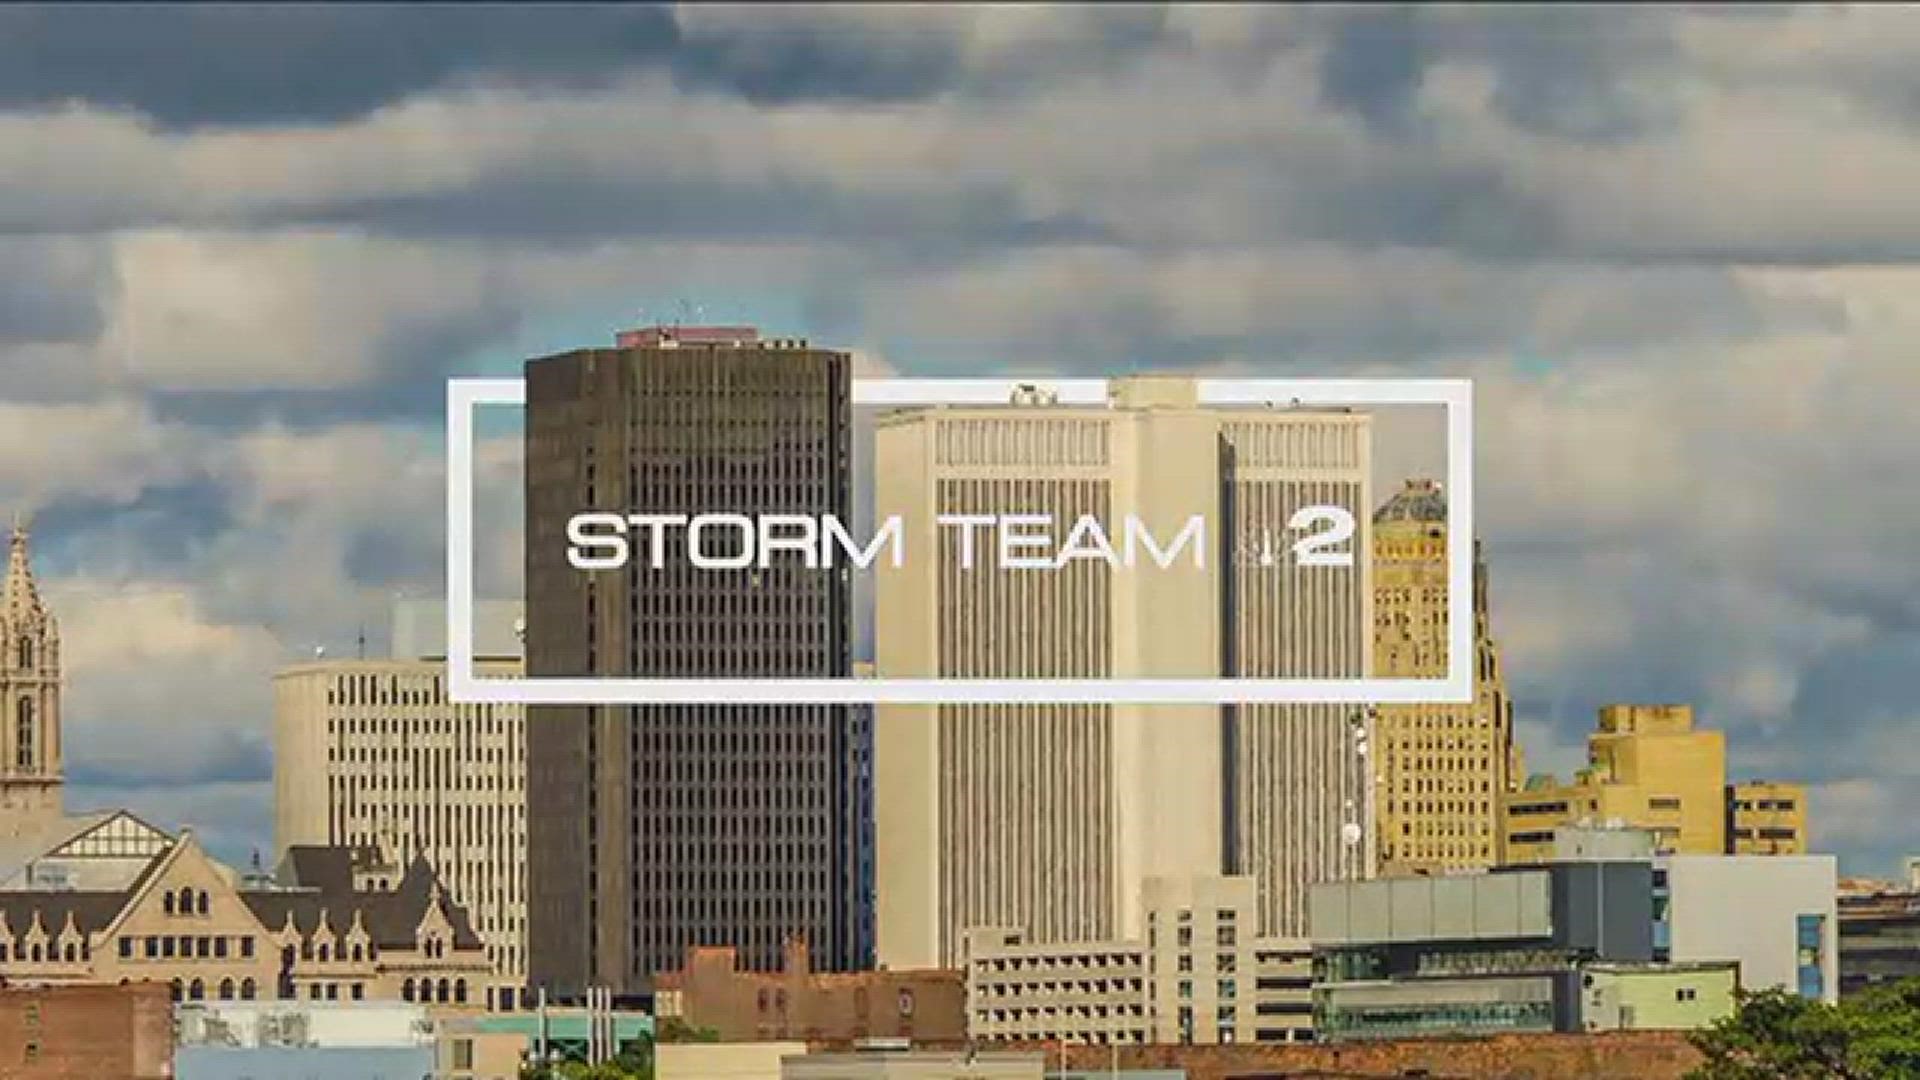 Storm Team 2 has your weather forecast with Carl Lam.